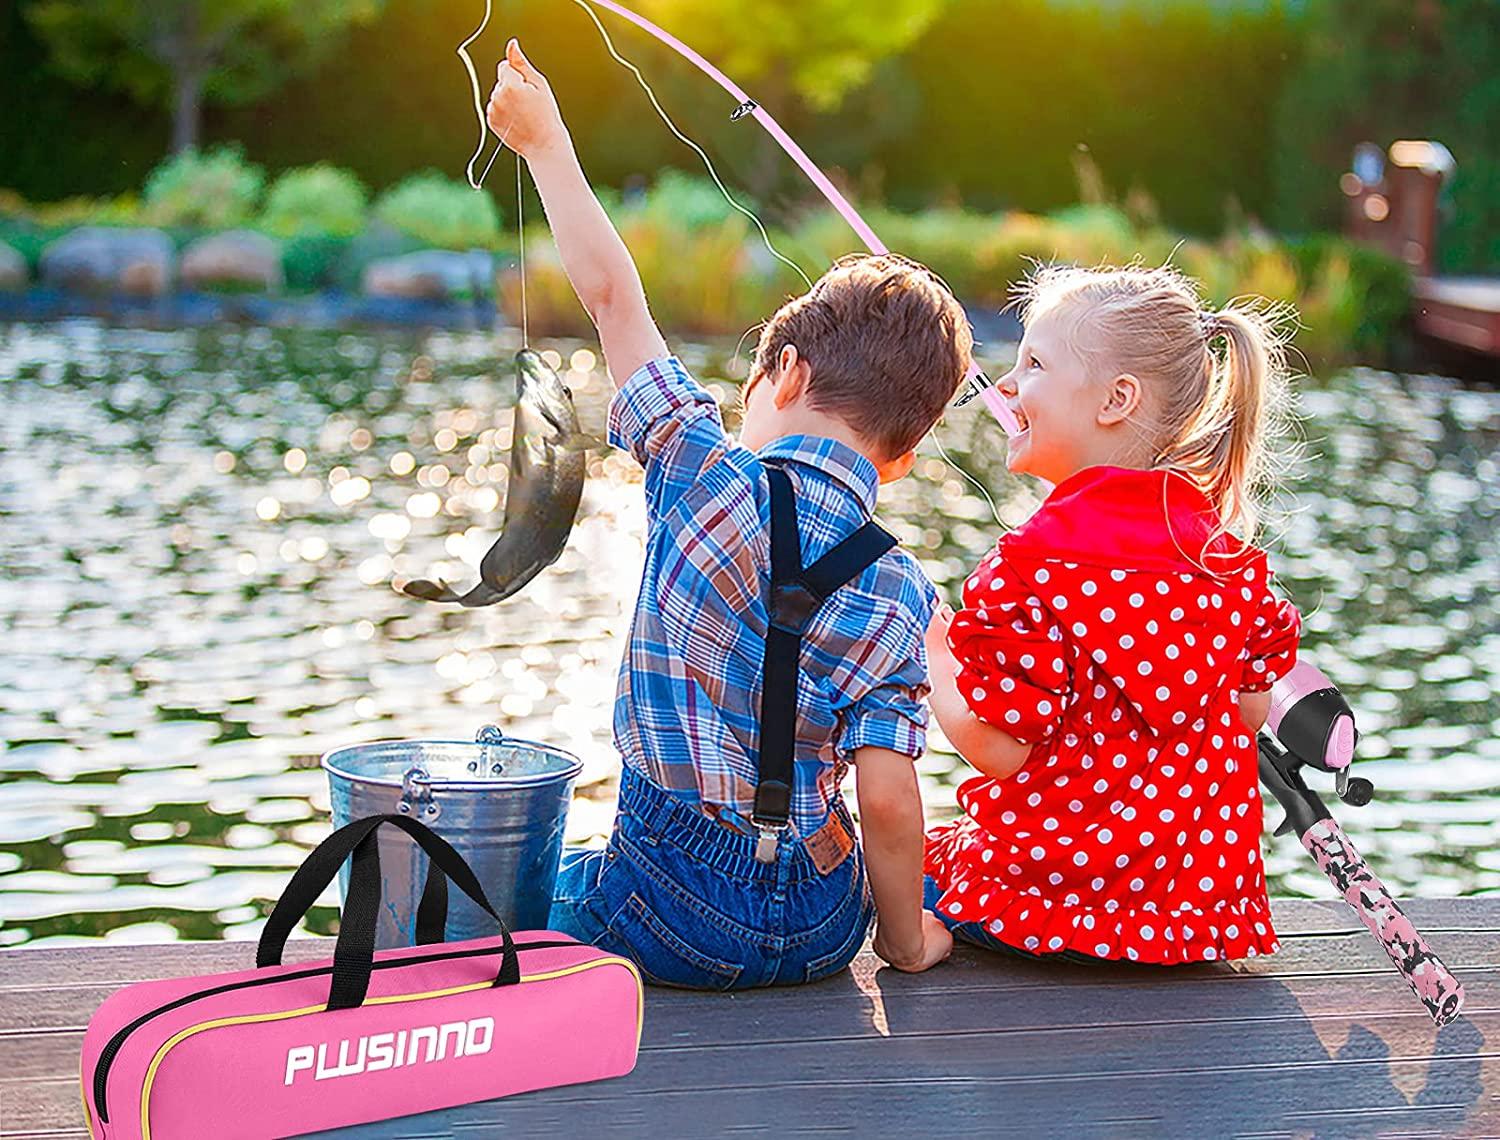 PLUSINNO Fishing Rod and Reel Combos - Complete Kit for Novice Anglers